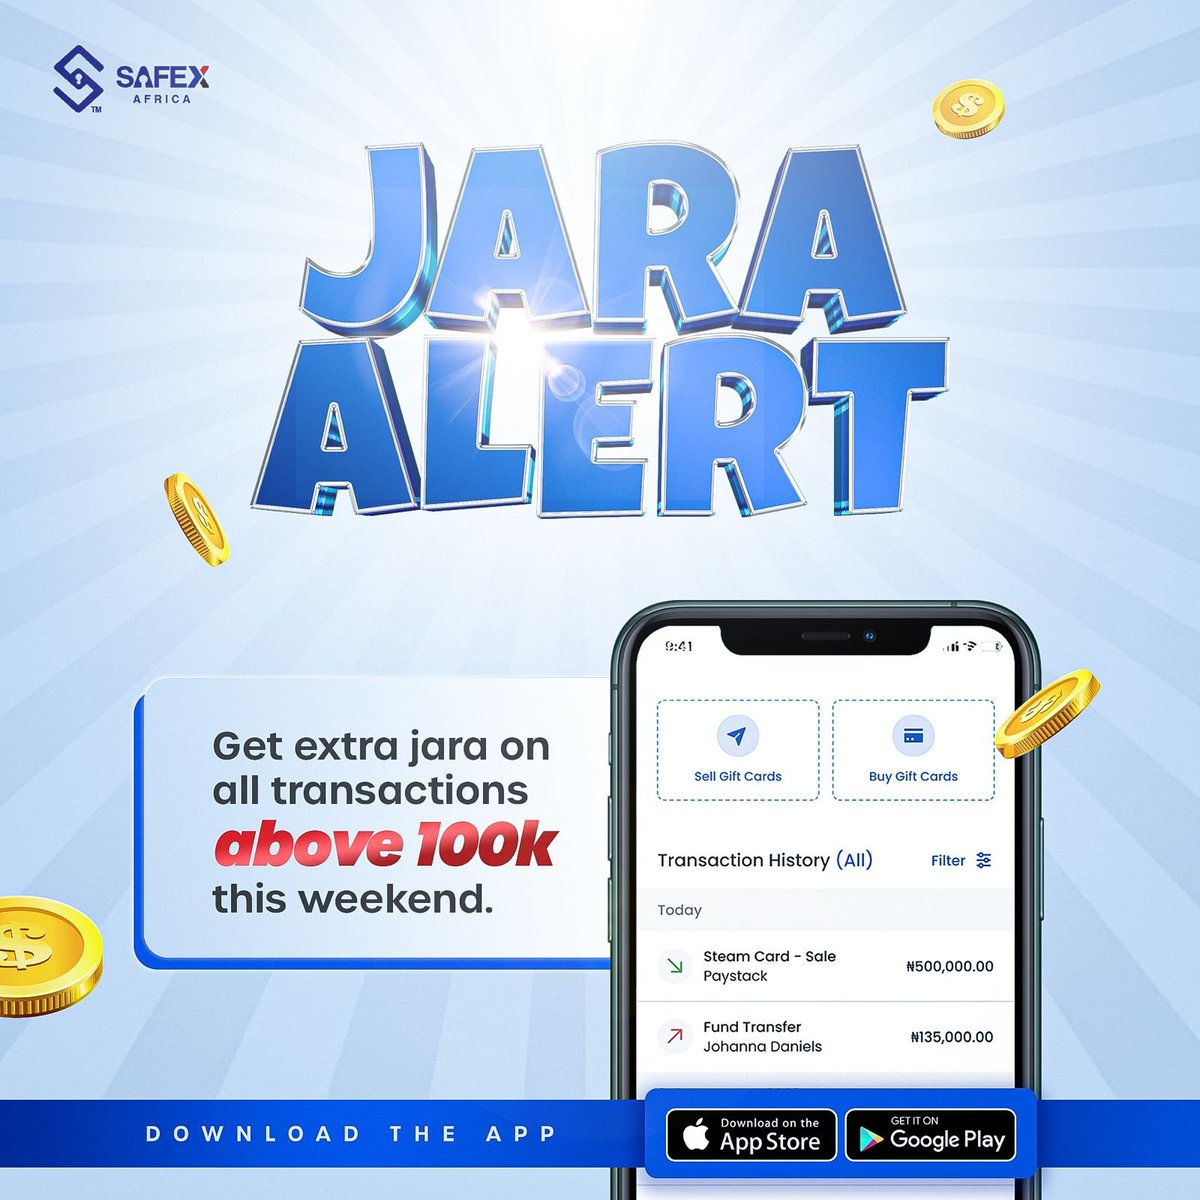 We are making it rain this weekend by giving you extra jara on all transactions above 50,000.

You will see this when you complete your transactions with us.
Let's freaky this Friday and weekend together.

#SafeX #FreakyFriday #Jara